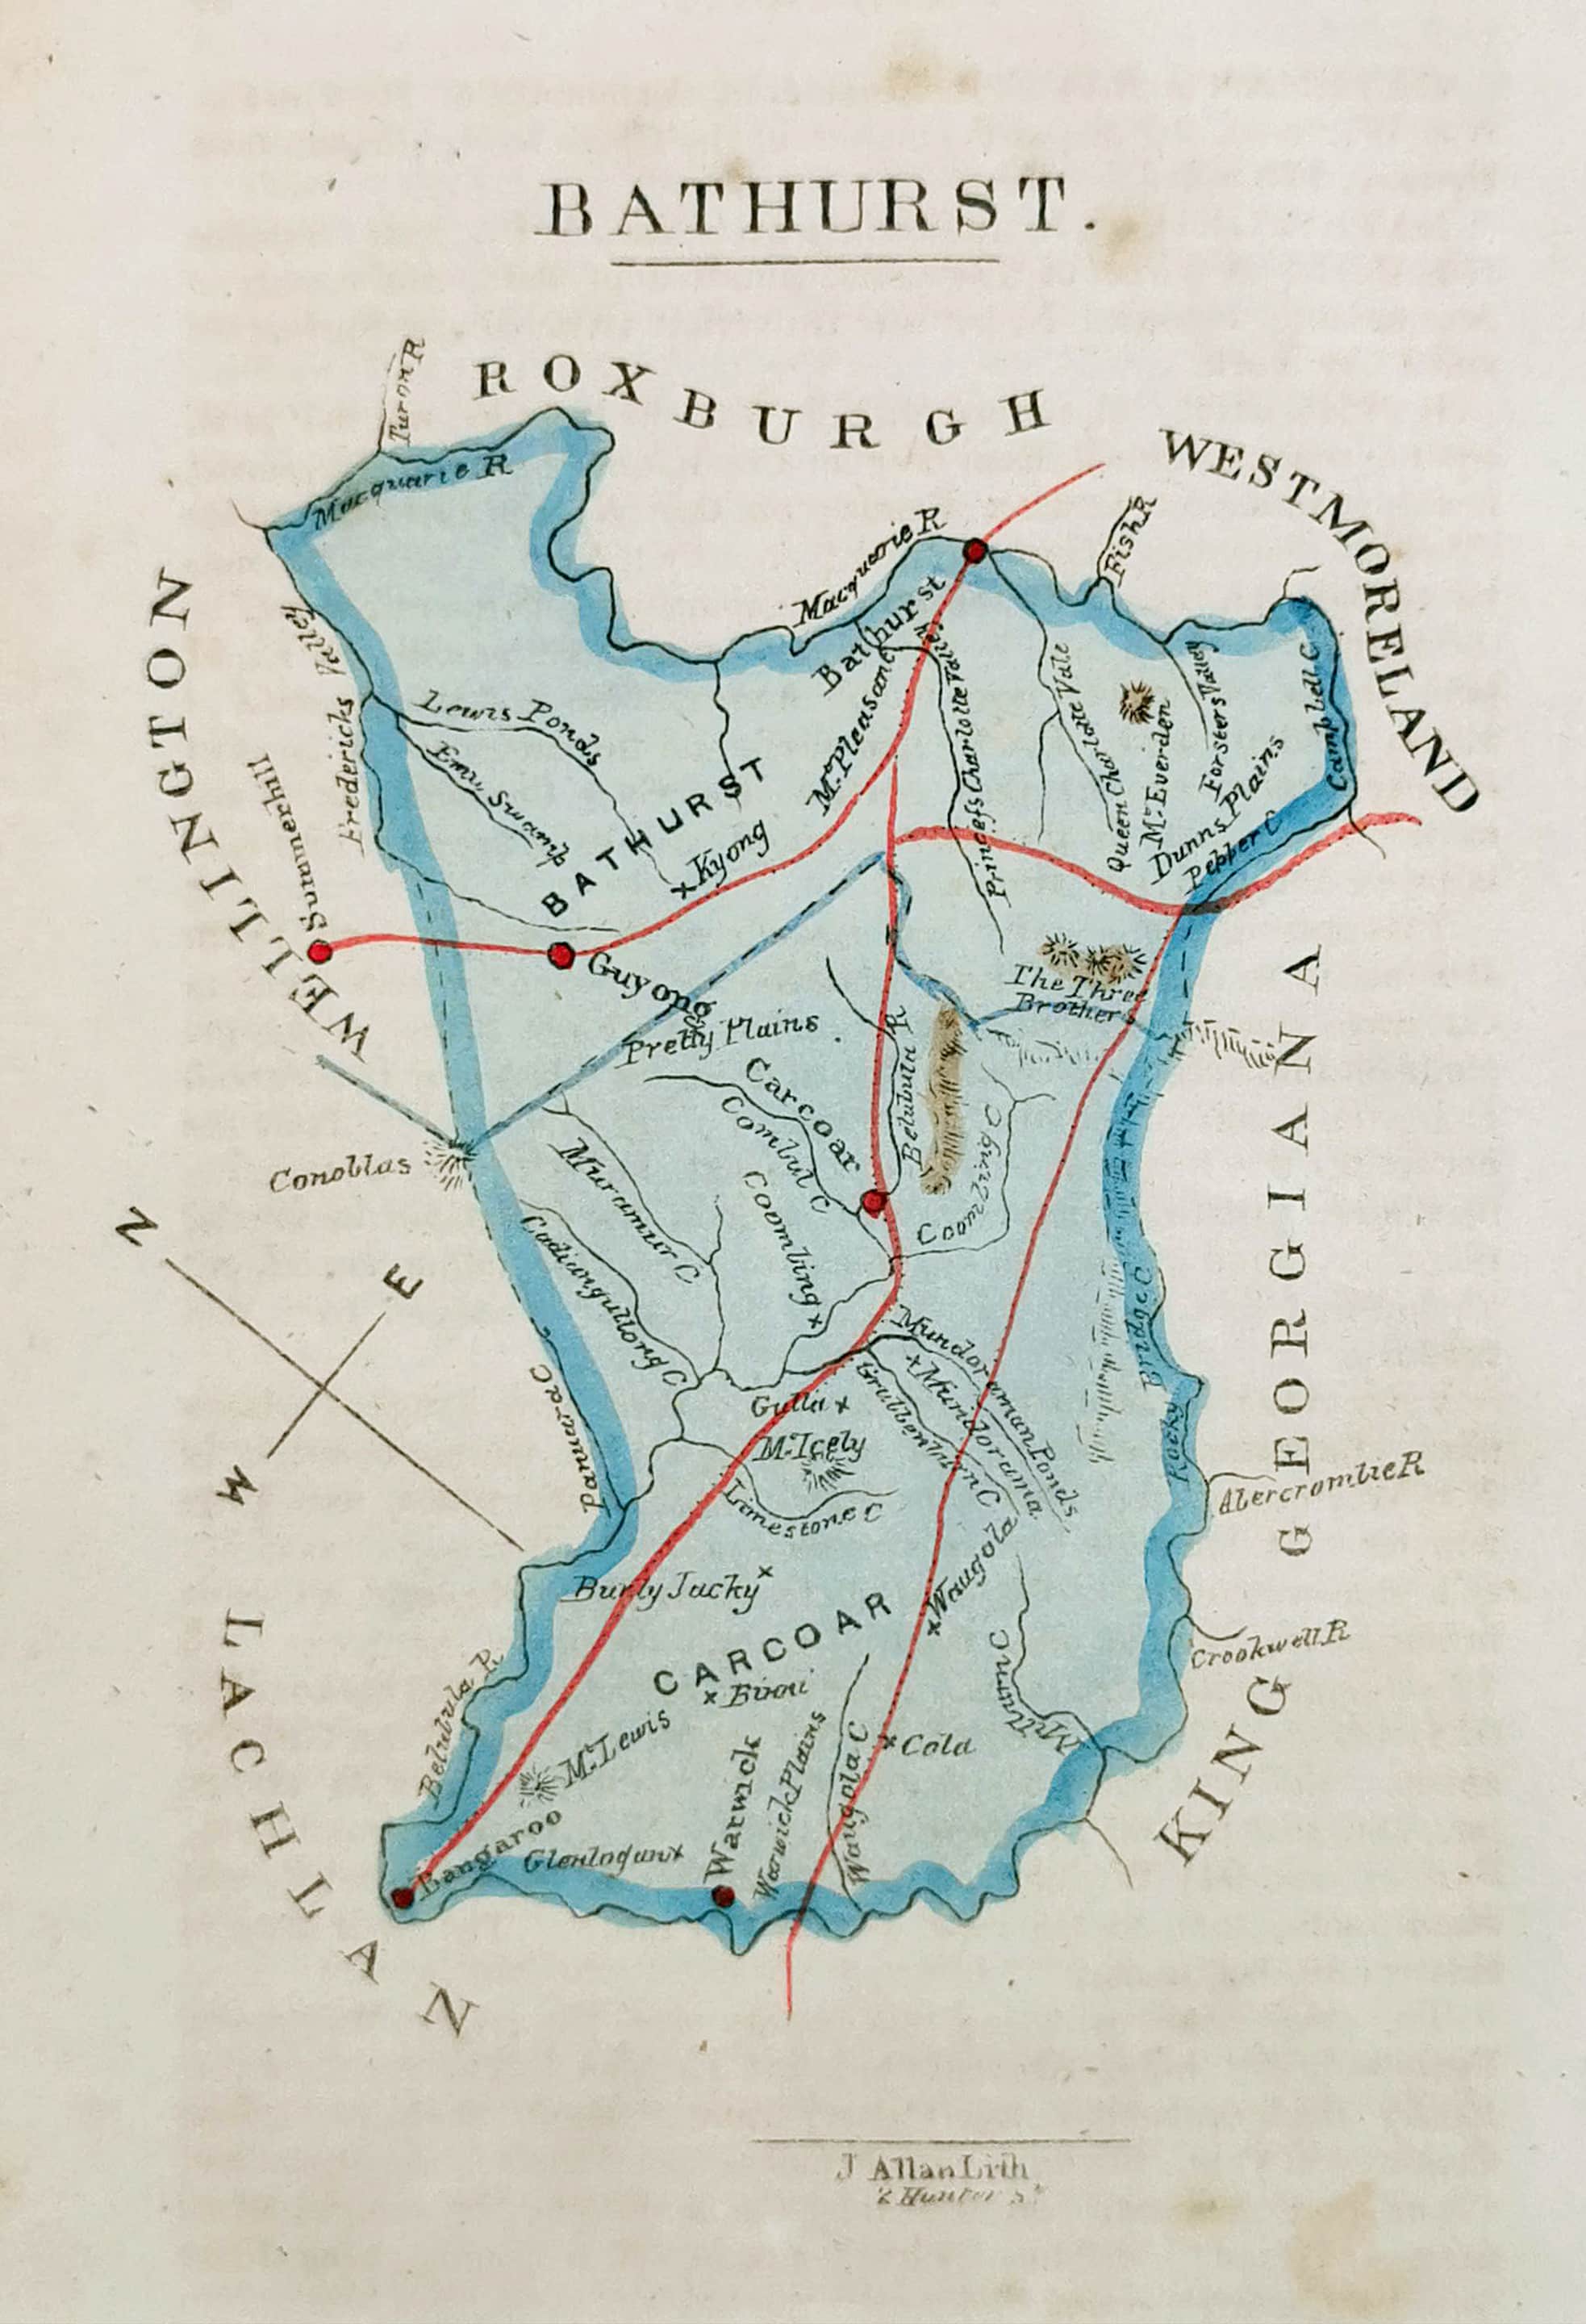 Bathurst. - Antique Map from 1848